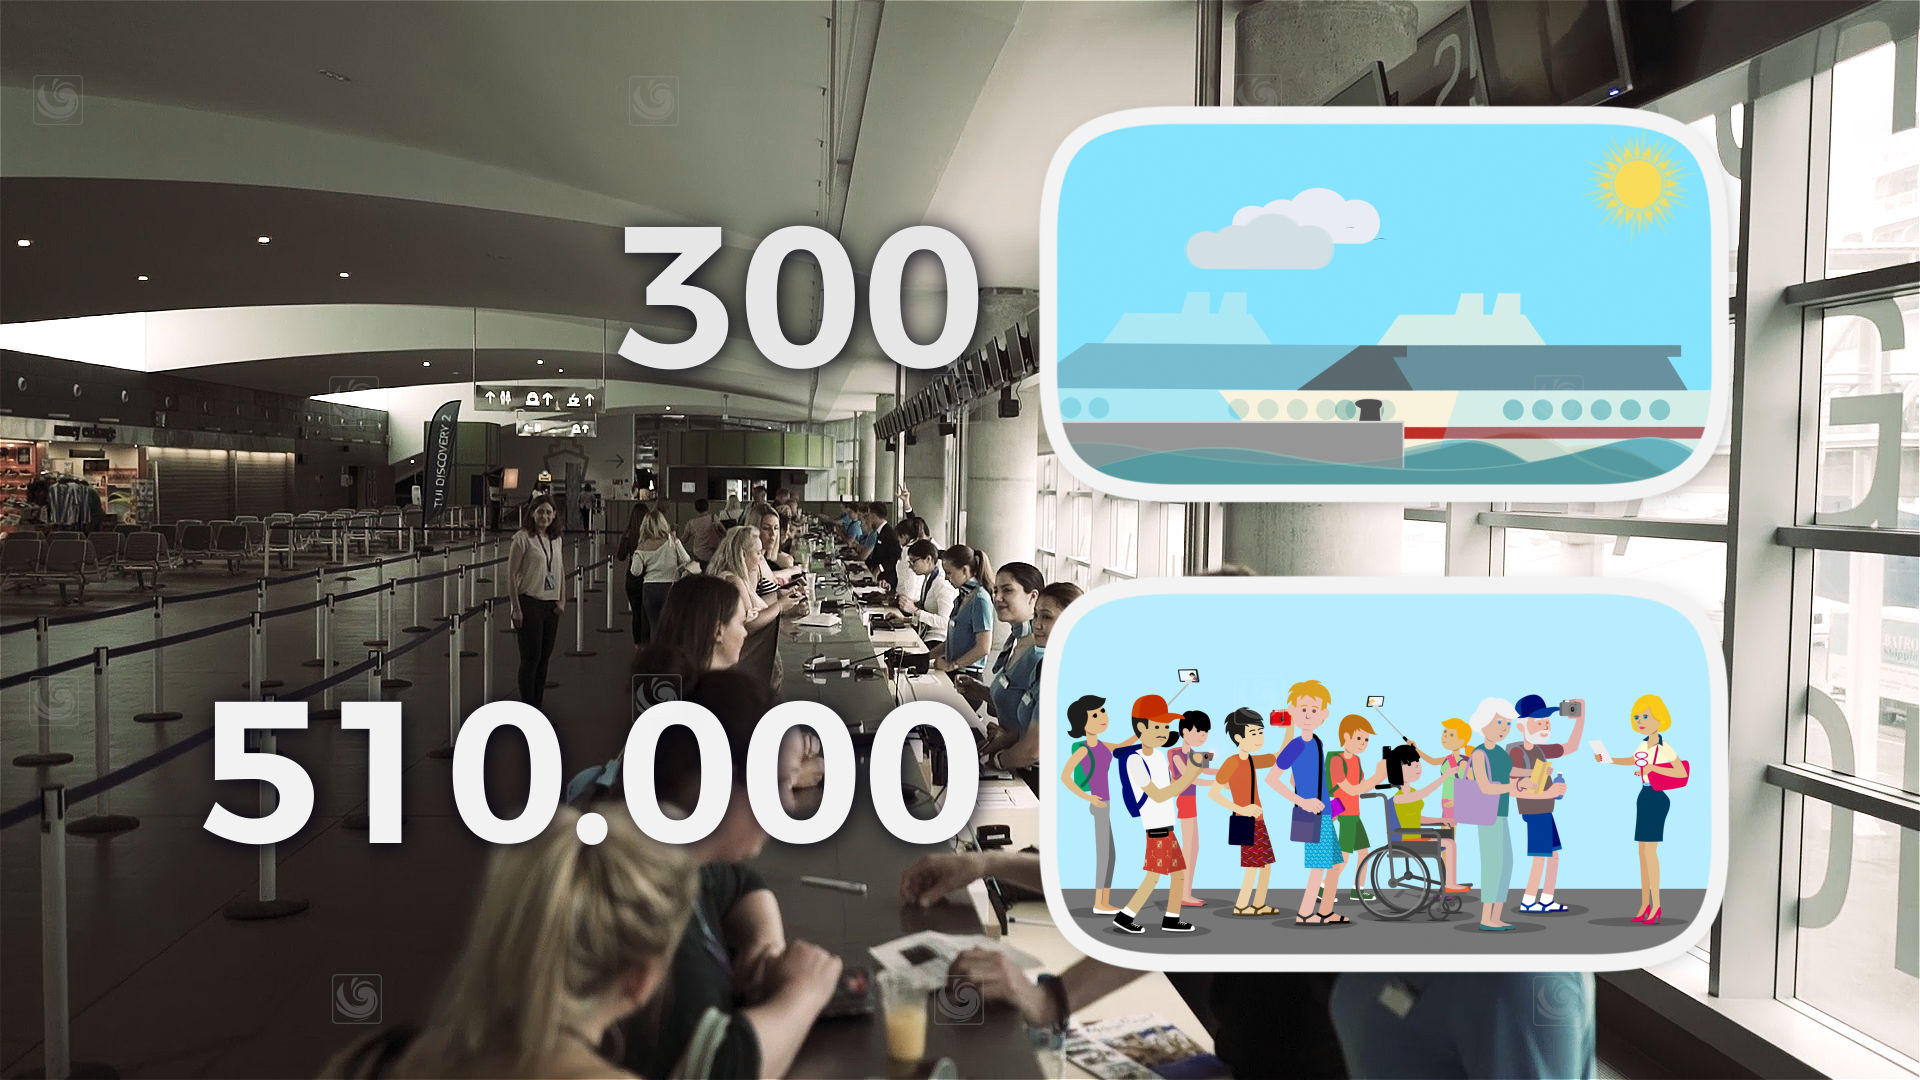 Videoframe showing a 2D animation overlapping real video footage, all about cruise ship tourism